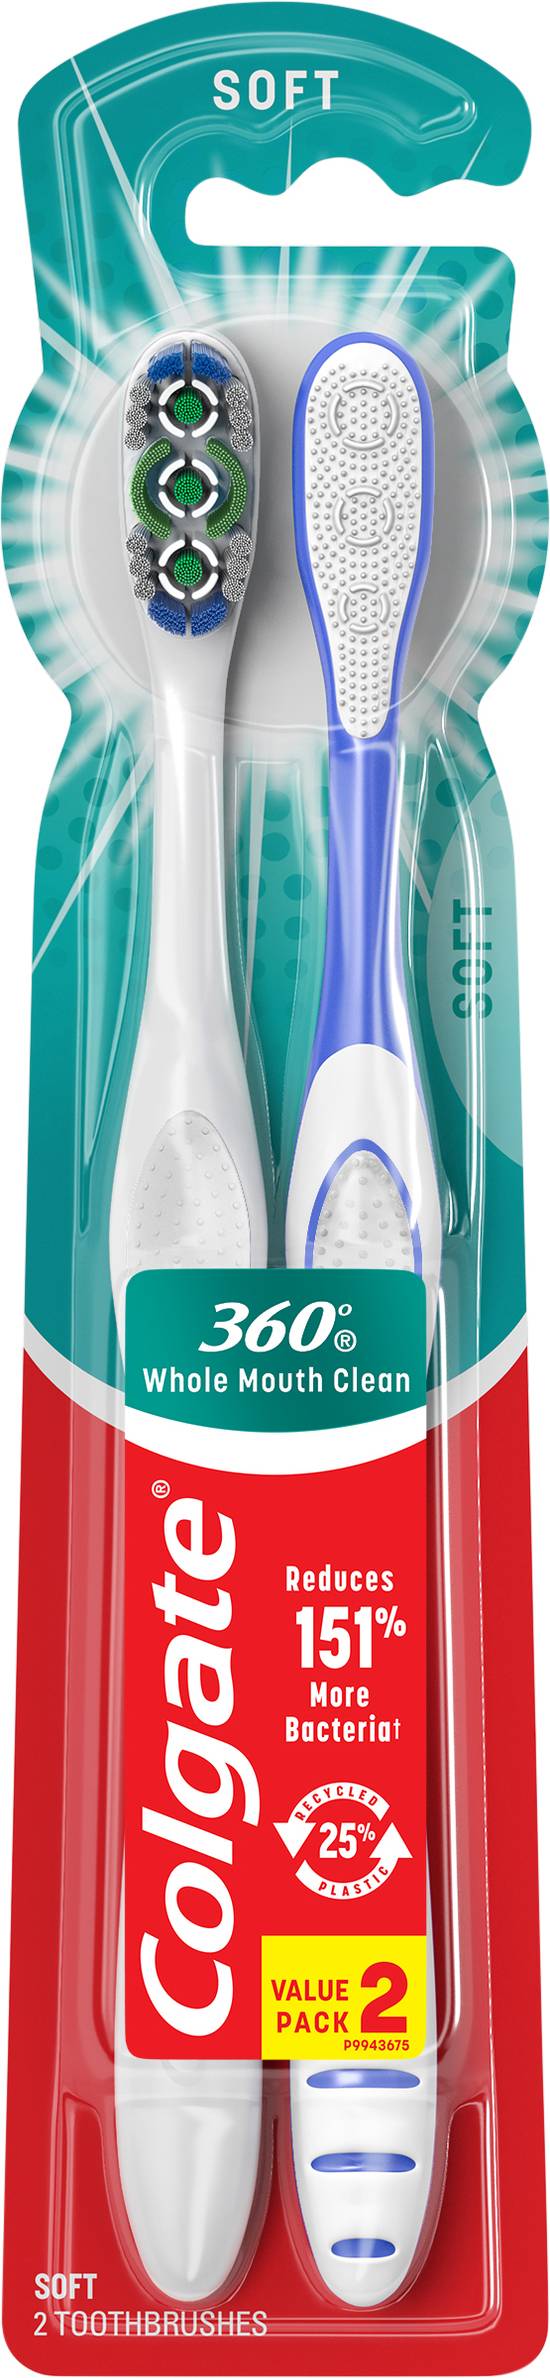 Colgate Whole Mouth Clean Soft Toothbrushes